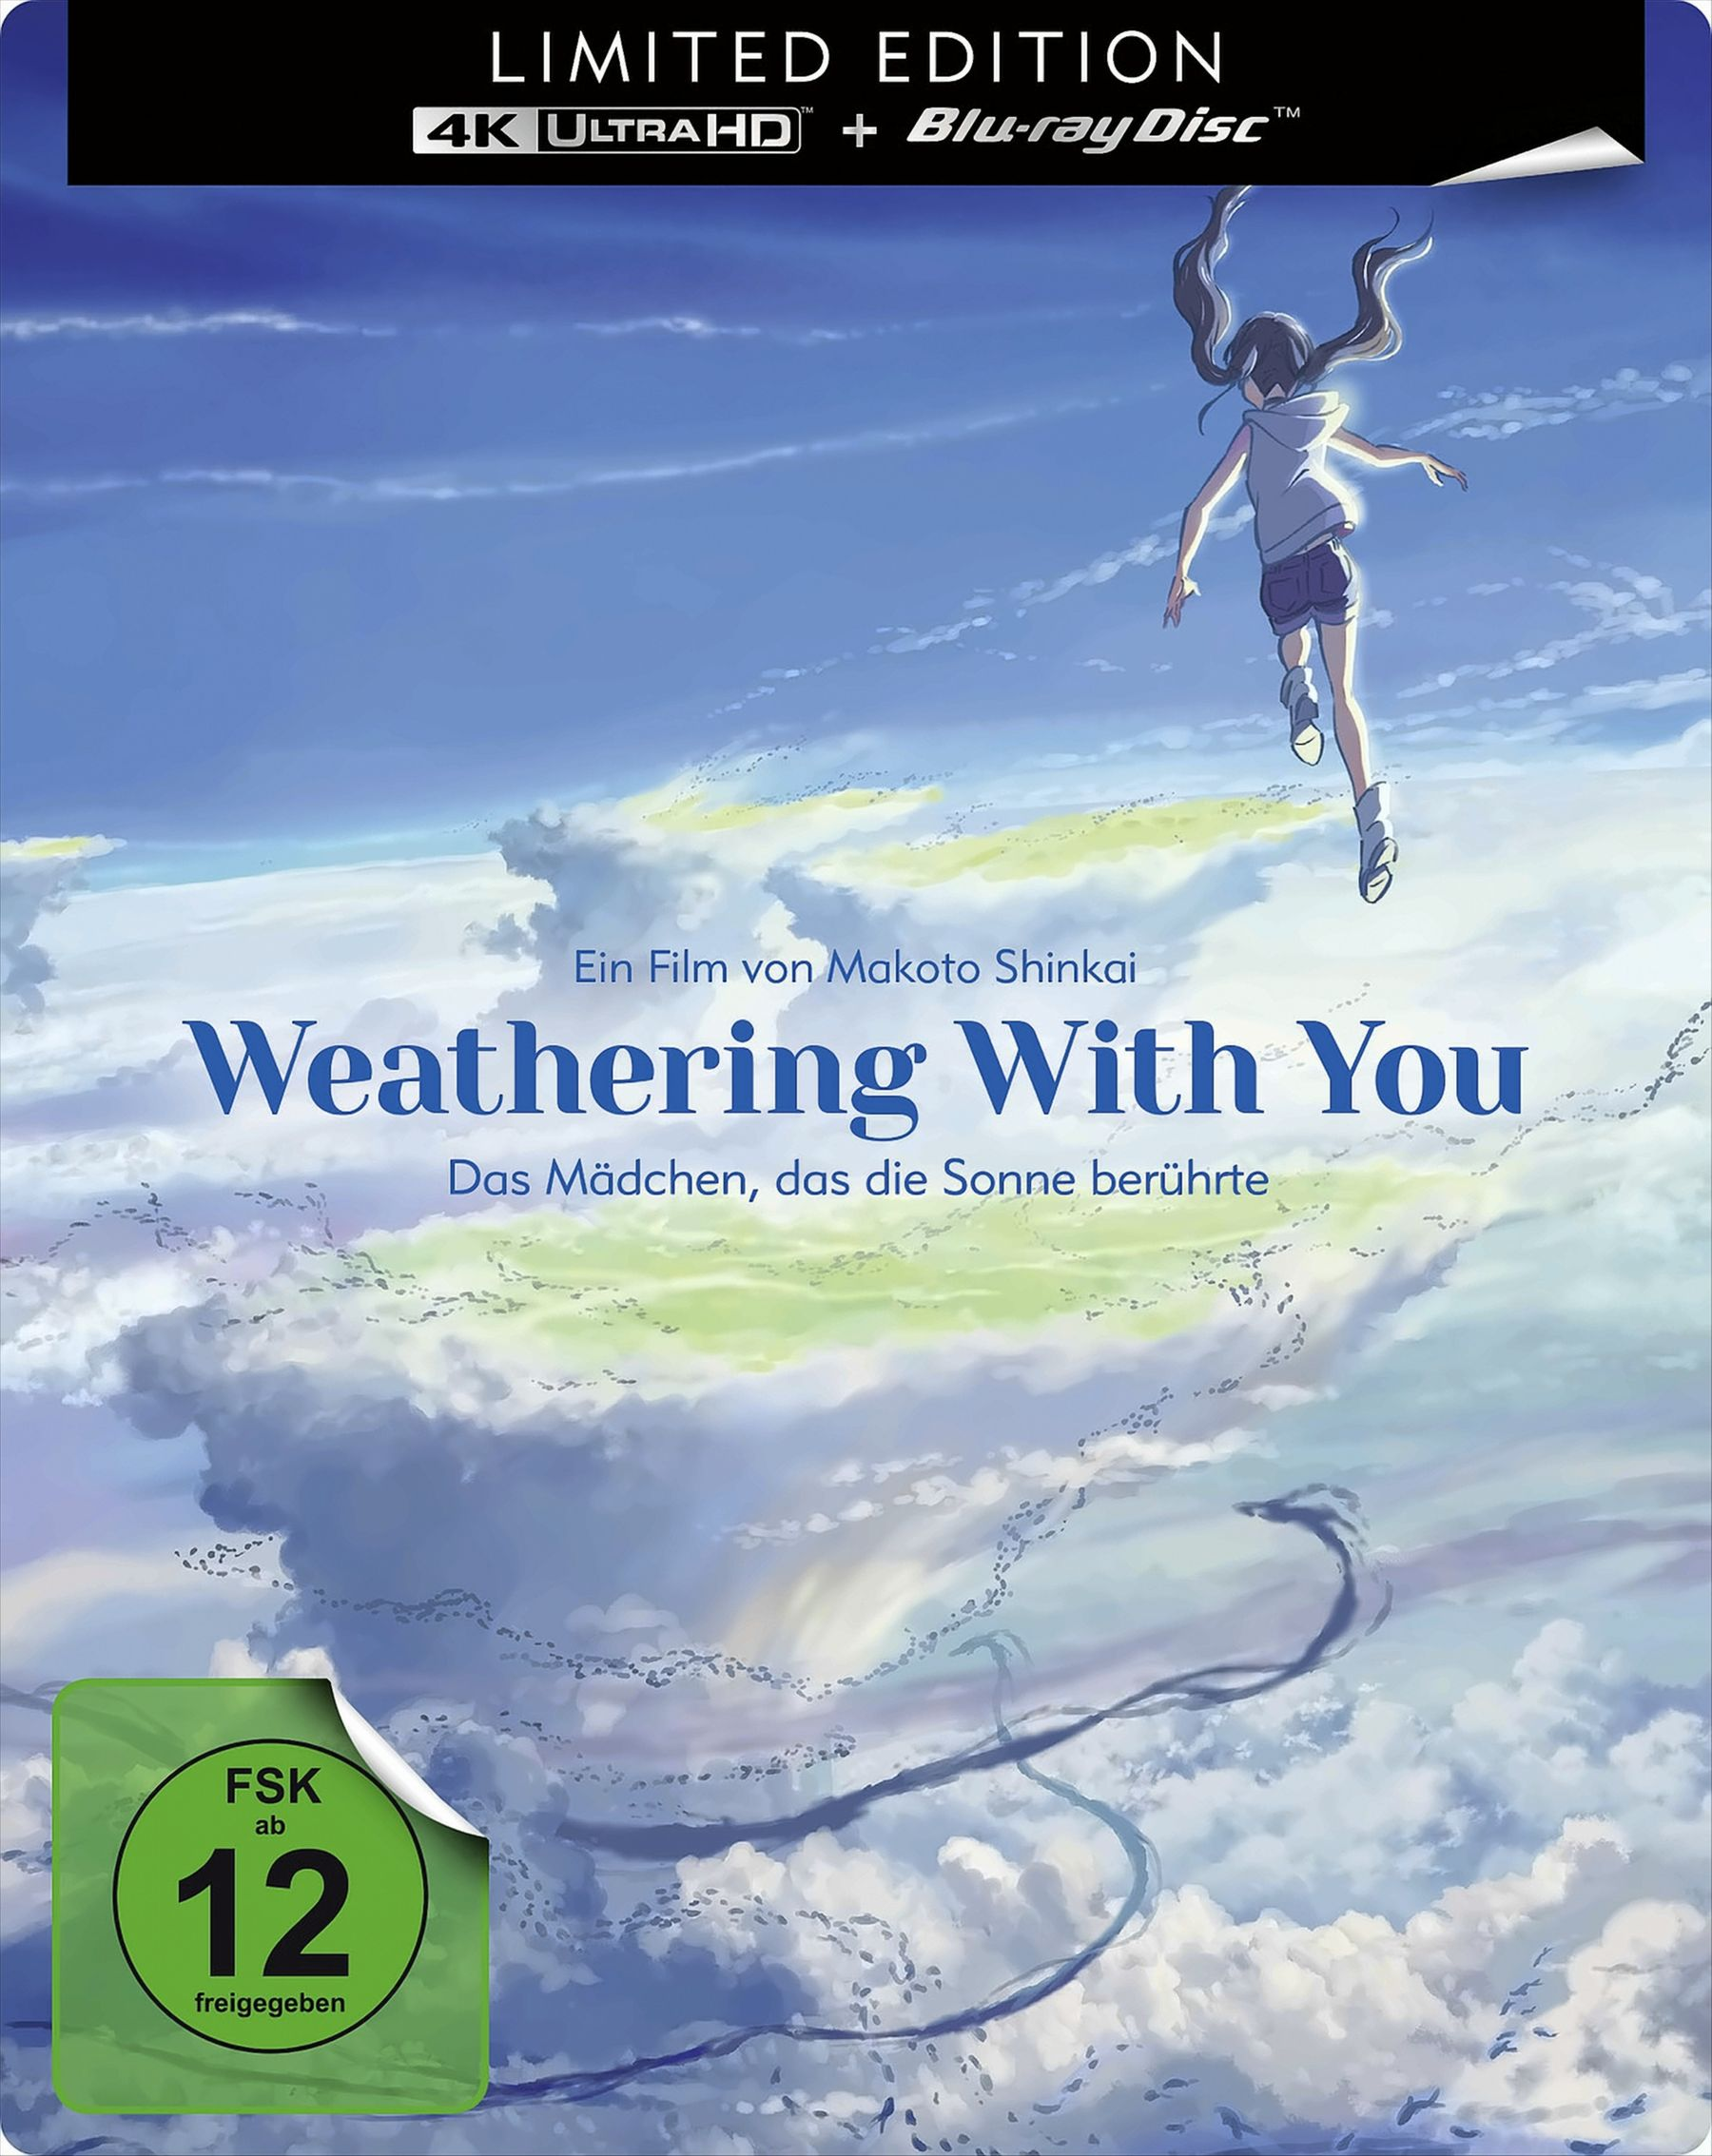 Weathering With You - Blu-ray UHD) (Steelbook) Edition] [Limited [Blu-ray] (4K